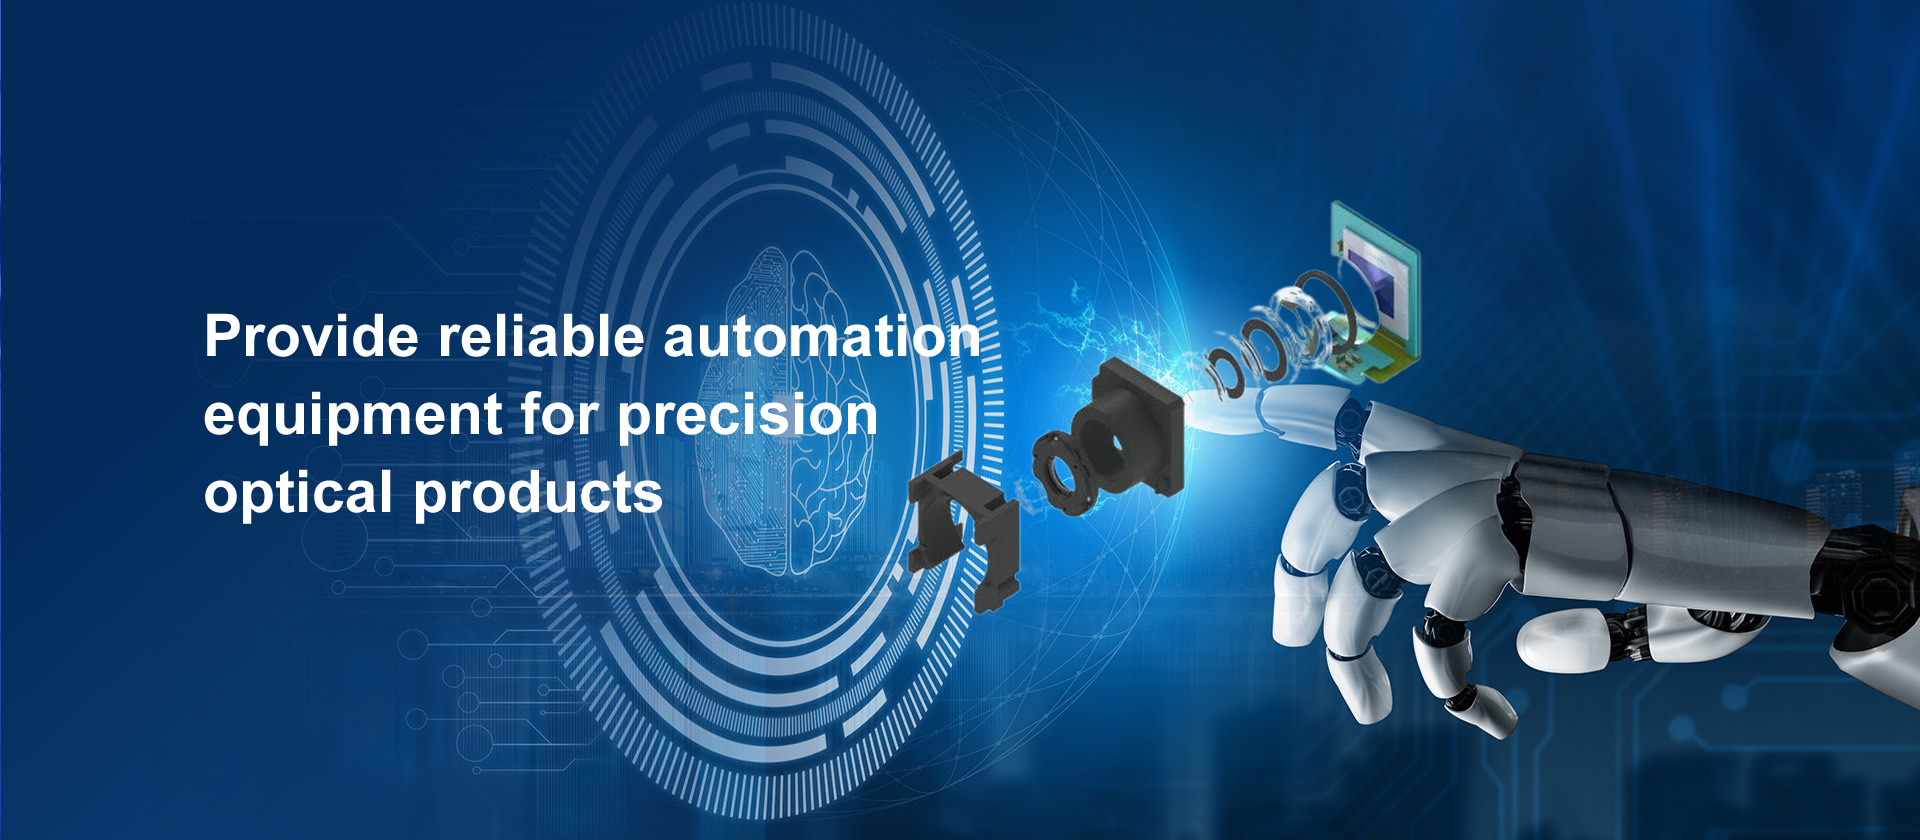 Provide reliable automation equipment for precision optical products